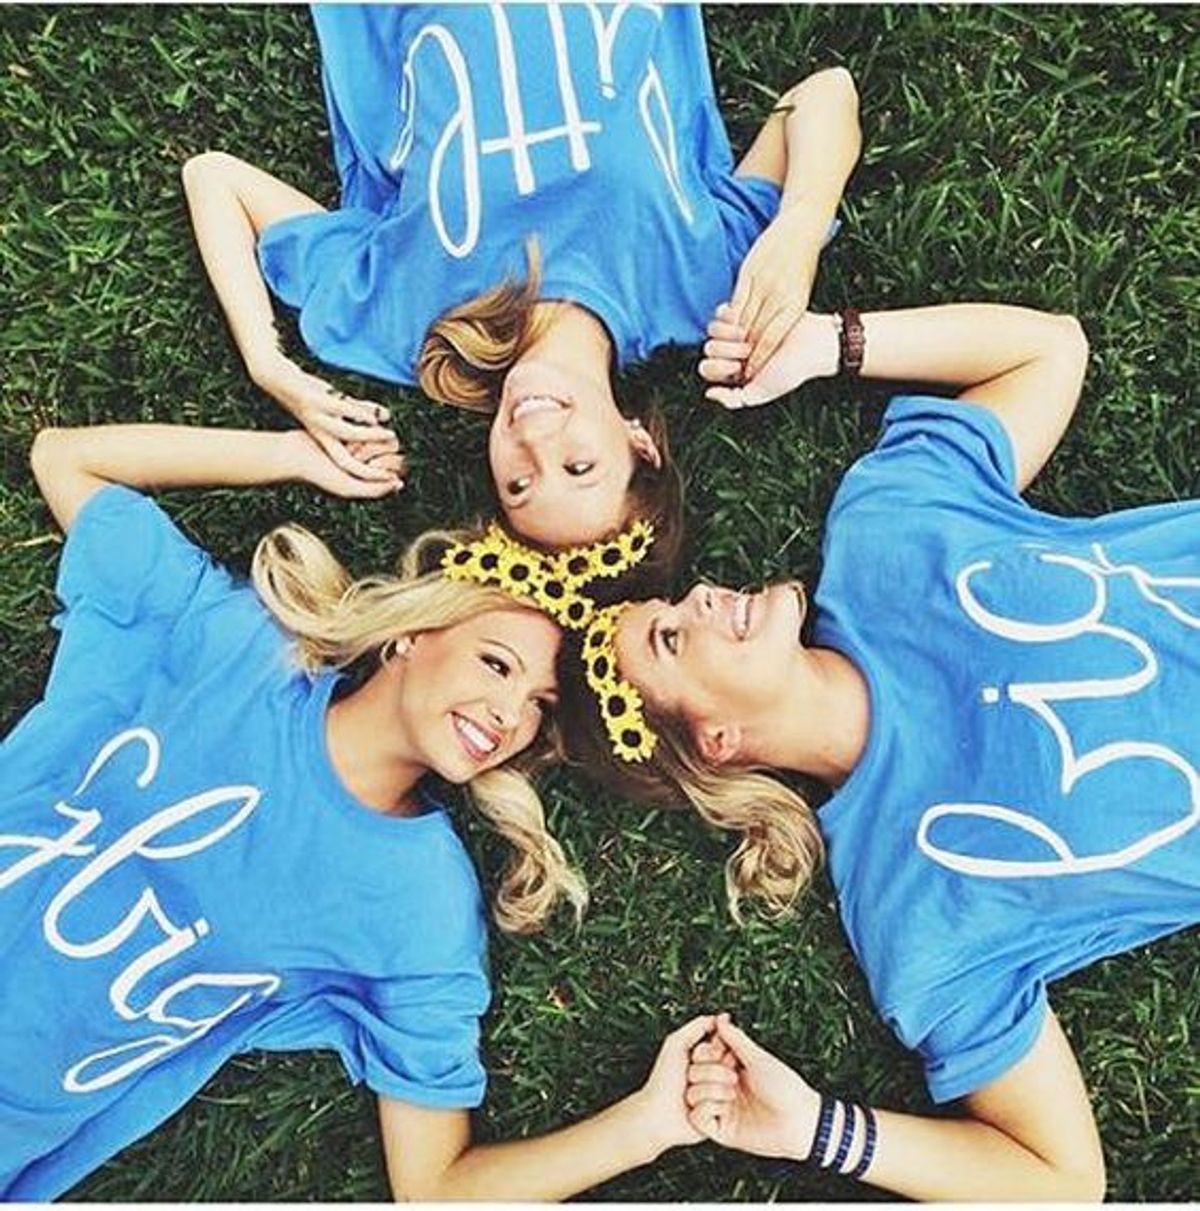 The Big-Little Relationship: It's For A Lifetime, Not A Little Time